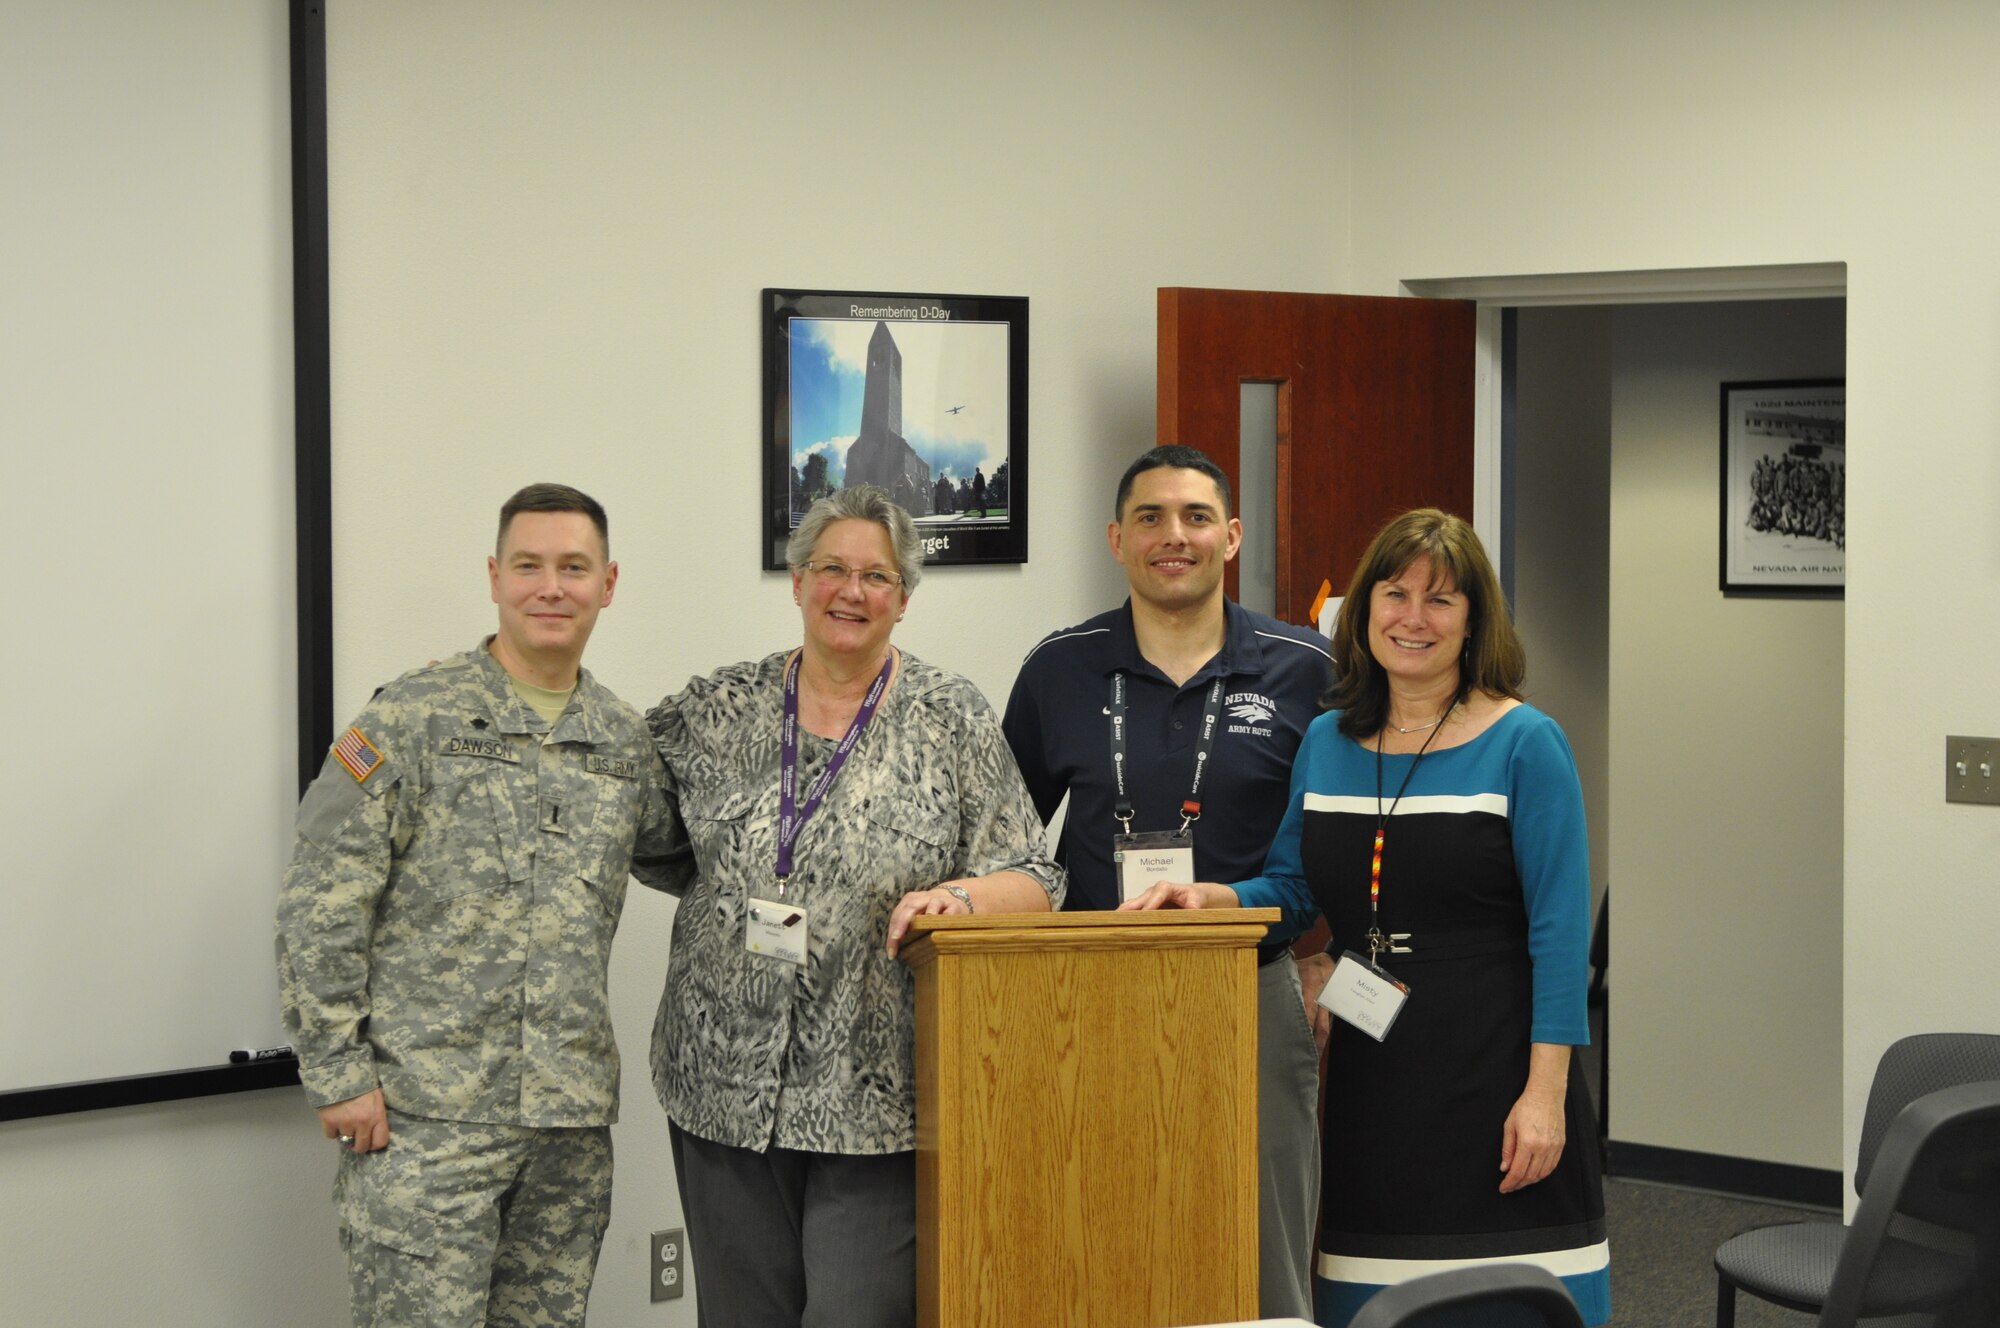 (Left to right) Nev. Army National Guard 1st Lt. Chaplain Candidate Robert Dawson, Ms. Janett Massolo, Nev. Army National Guard Capt. Mike Bordallo, and Ms. Misty Allen take a break from conducting ASIST training at the 152nd Airlift Wing, Reno, Nev. on Thursday, 13 February.  ASIST training is offered quarterly to northern and southern Nevada locations.  (Photo by Master Sgt. Paula Macomber, 152nd Airlift Wing Public Affairs. RELEASED)